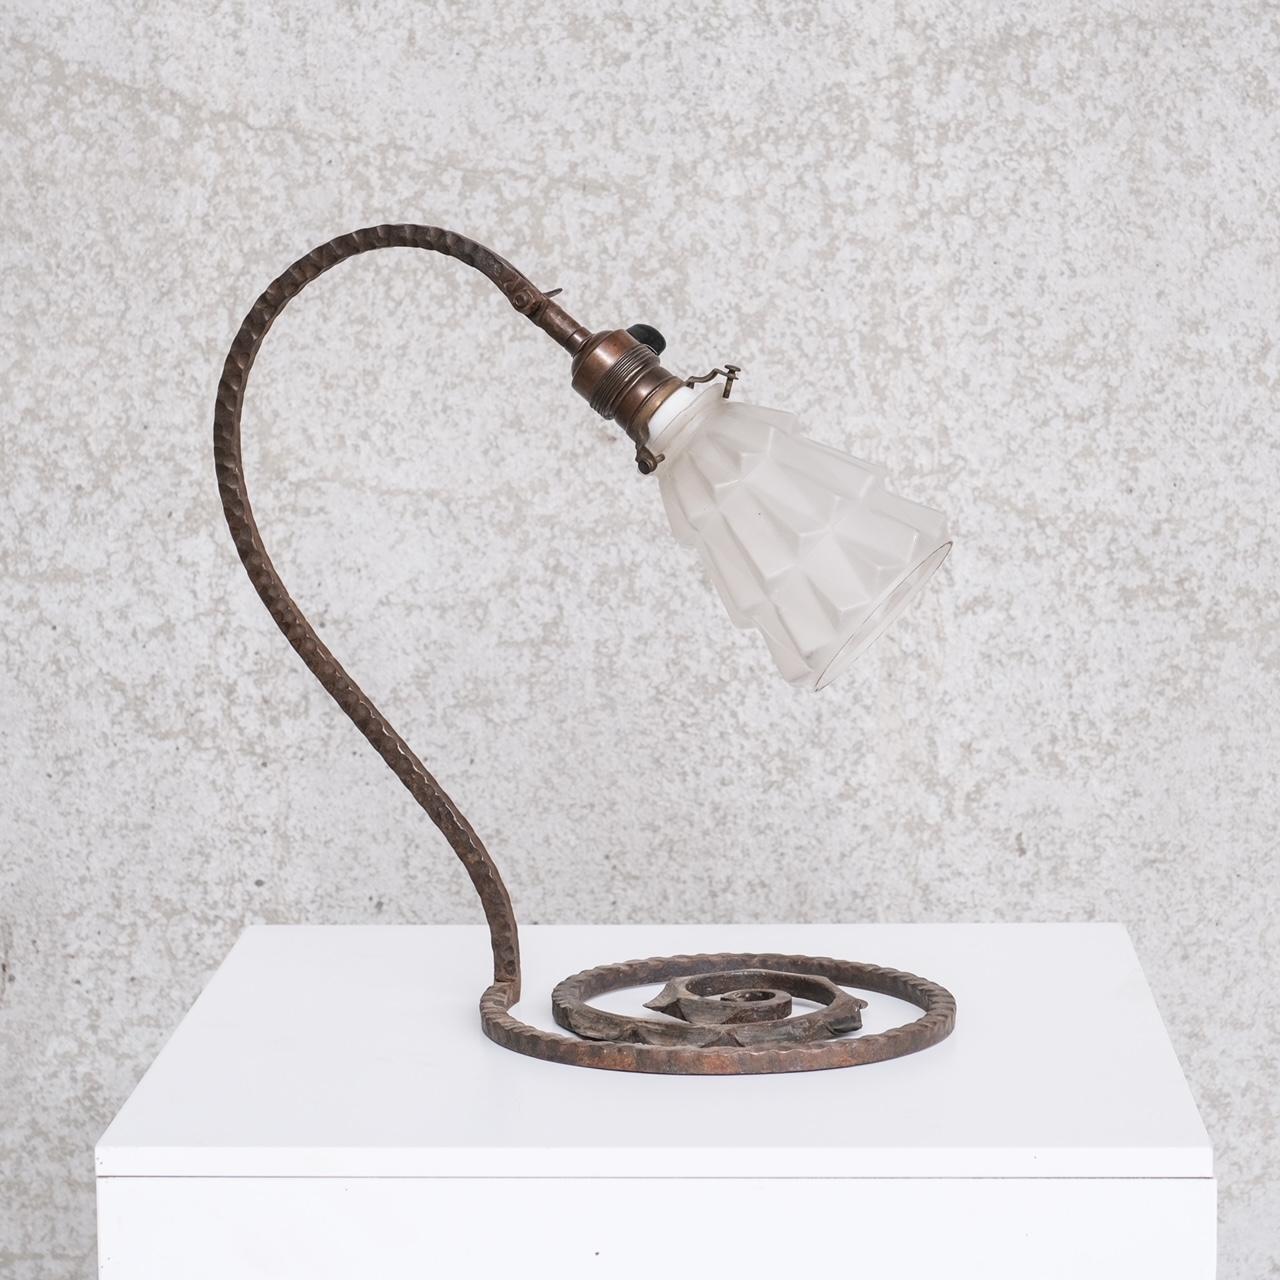 A stylish well formed iron table lamp.

France, c1930s.

With etched glass shade, which adjusts up and down.

Good vintage condition, some scuffs and wear commensurate with age.

Internal ref: 18/10/23/008.

Location: Belgium Gallery.

Dimensions: